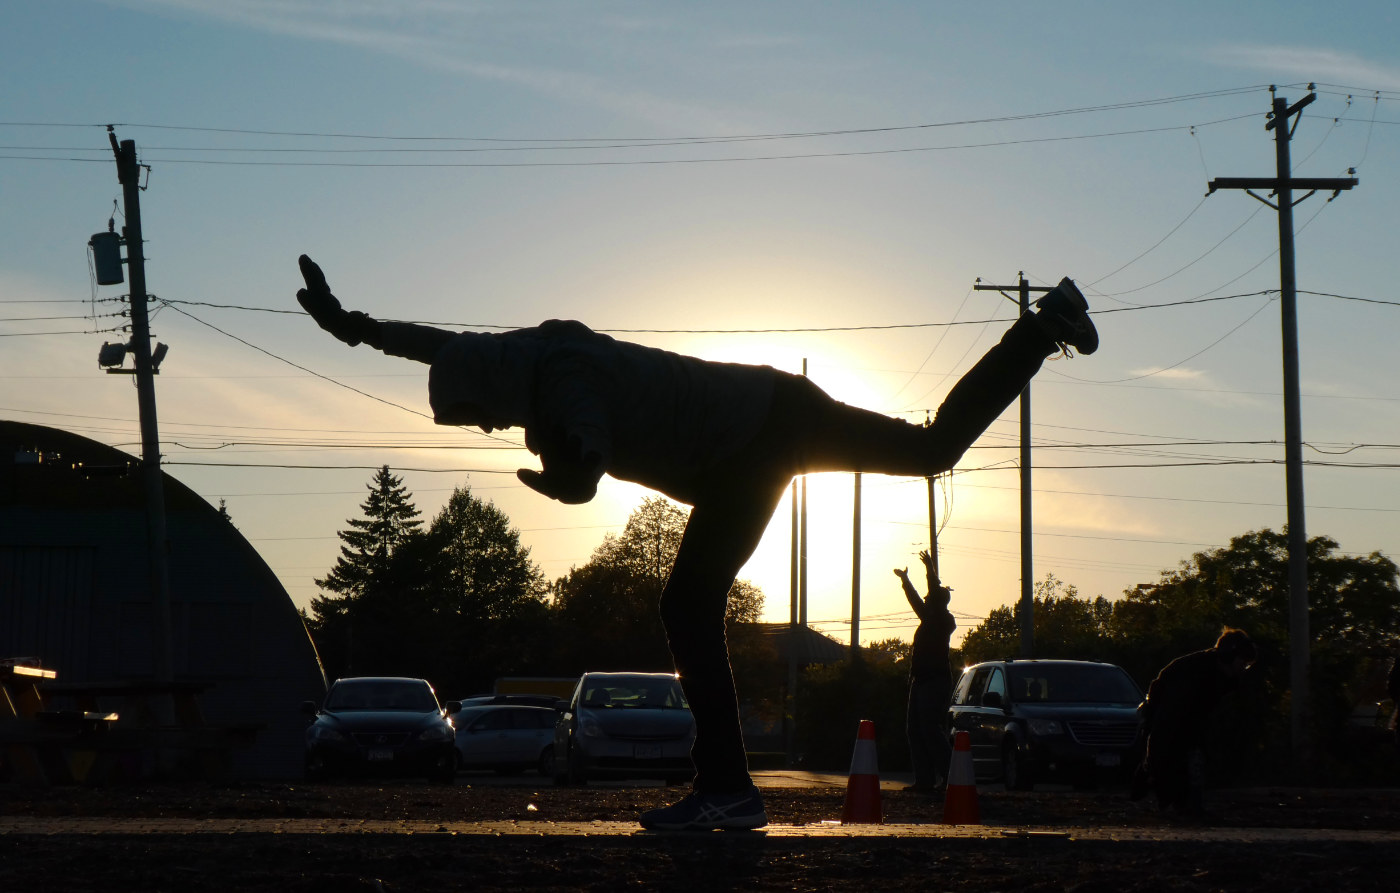 silhouette of figure standing on a single leg with leg outstretched backwards and arm outstretched forward against a setting sun framed by two telephone posts and lines